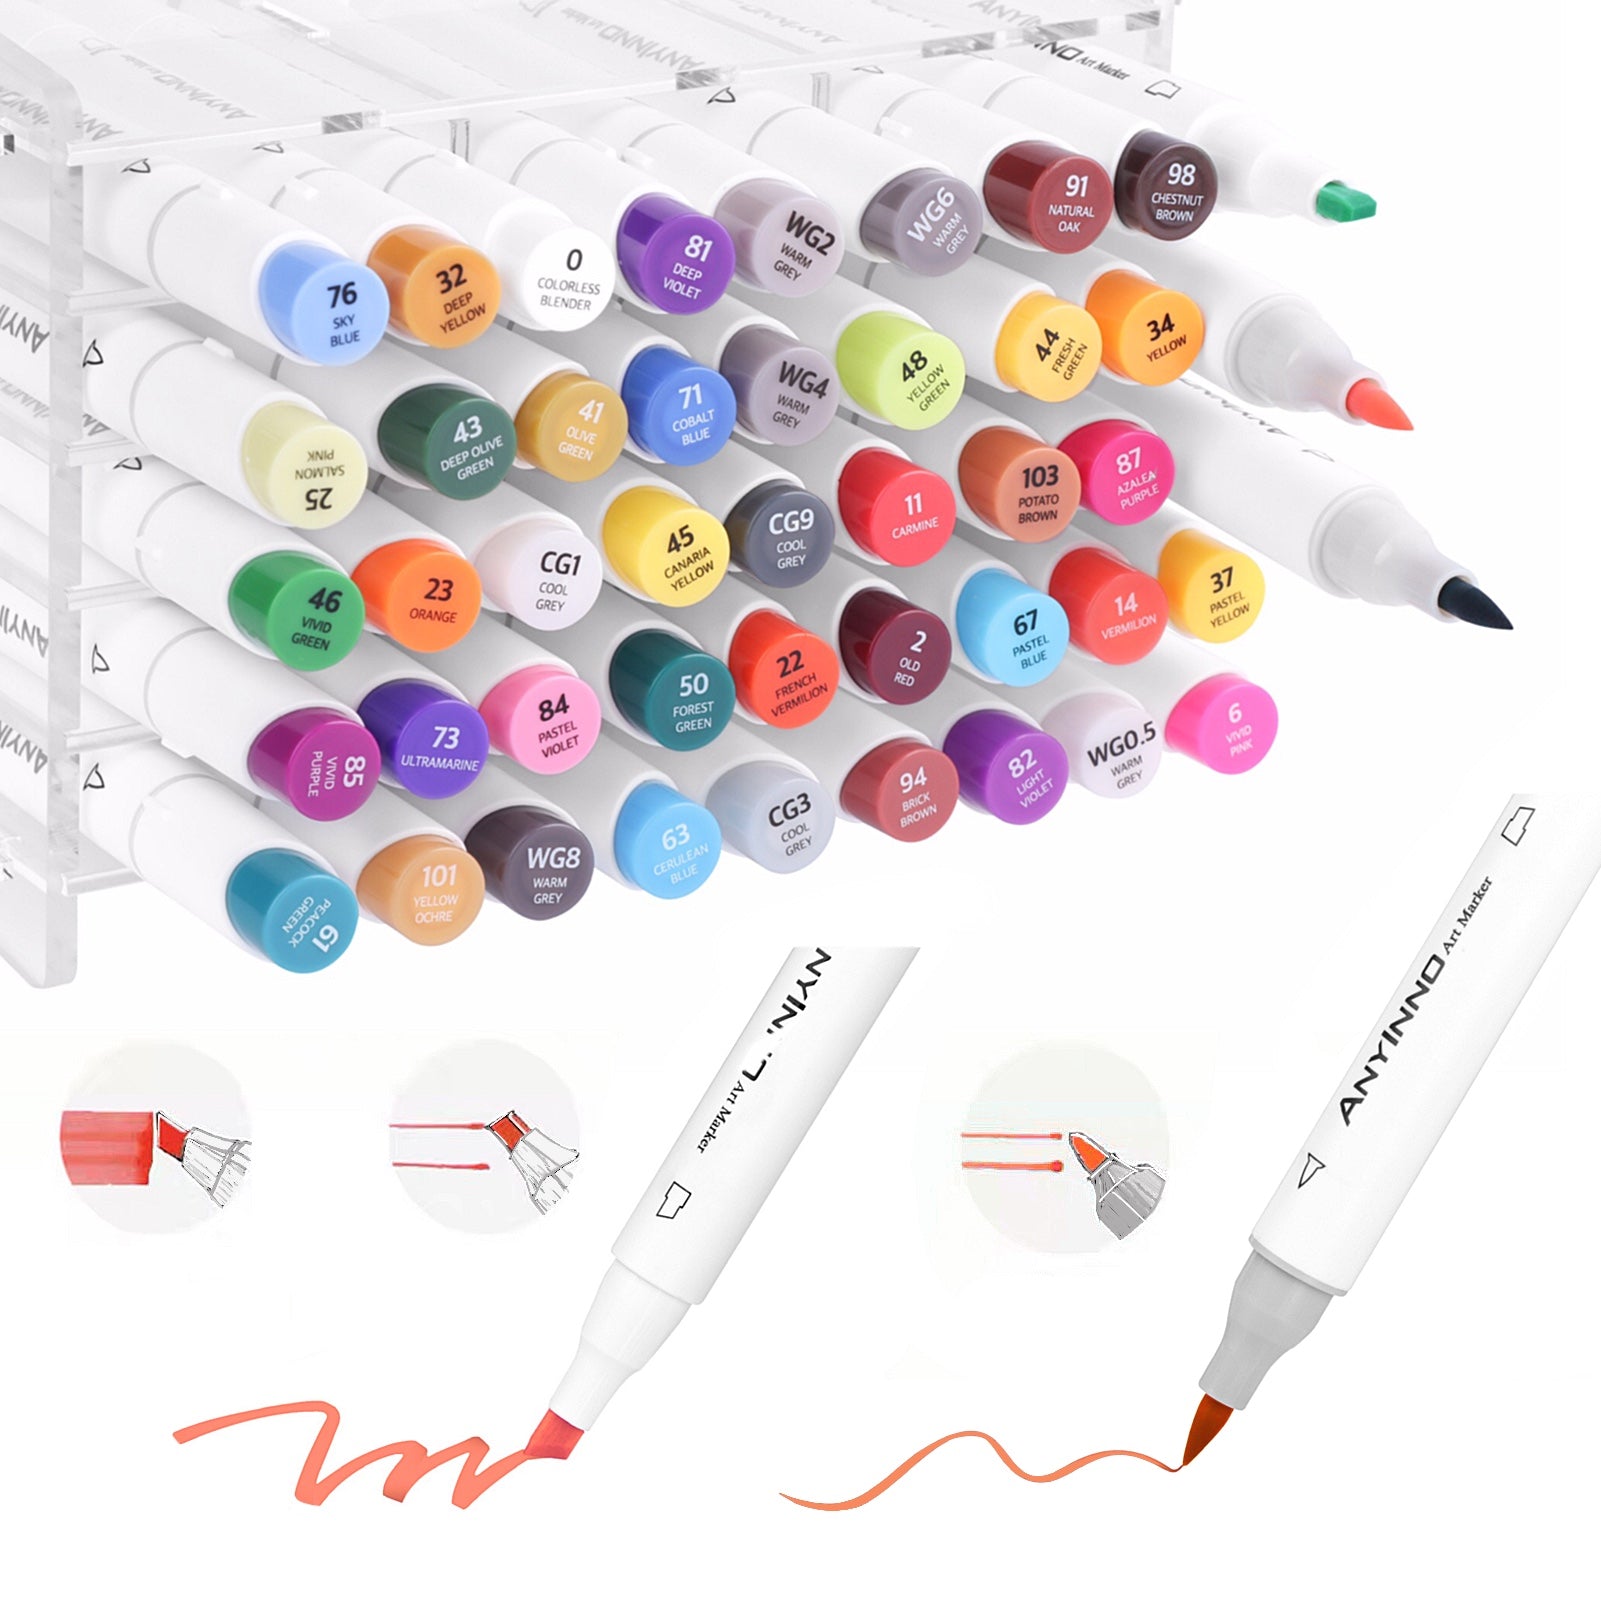 Everyone needs these art markers @ALISARTMARKERS 